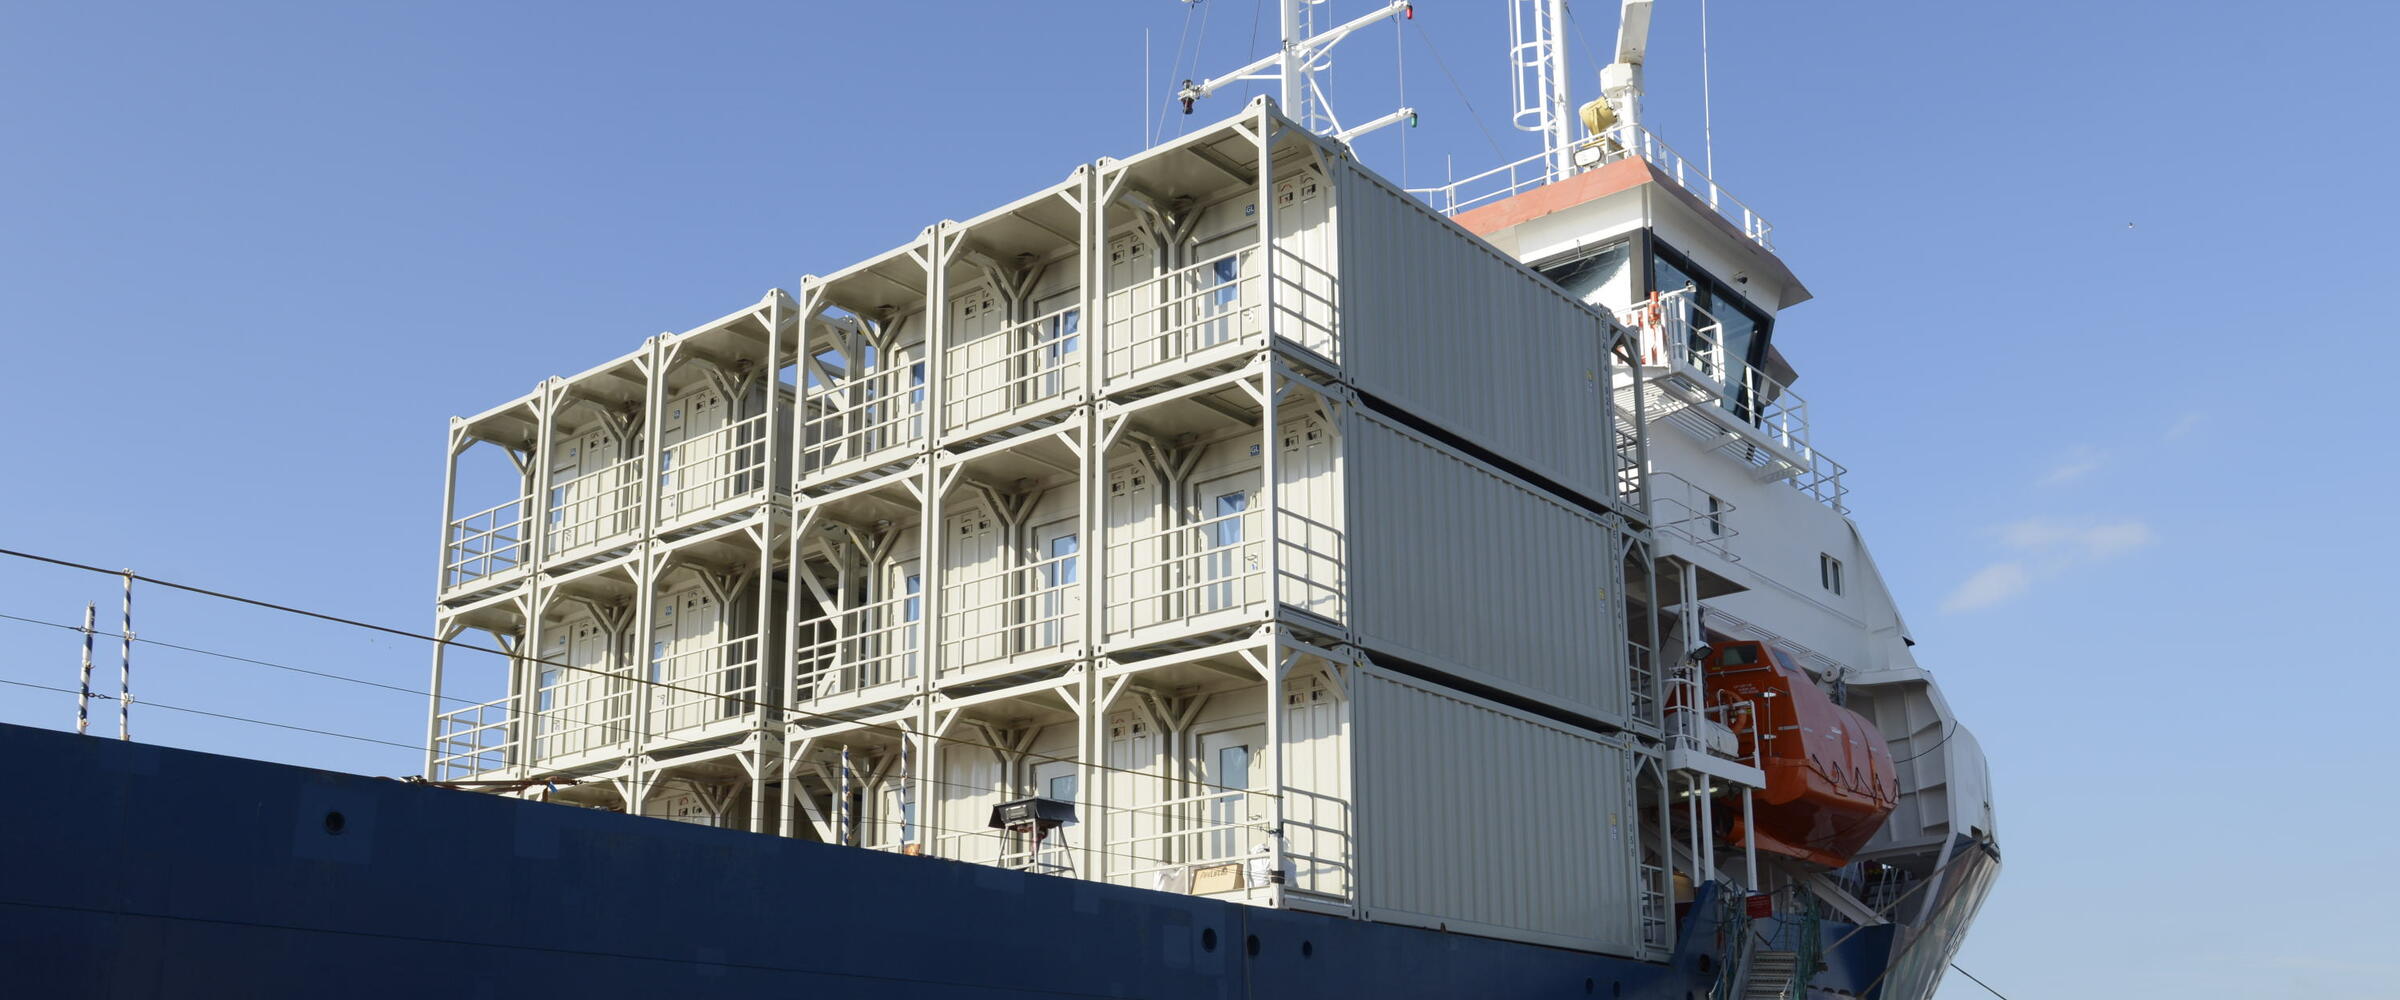 20ft Container on a vessel